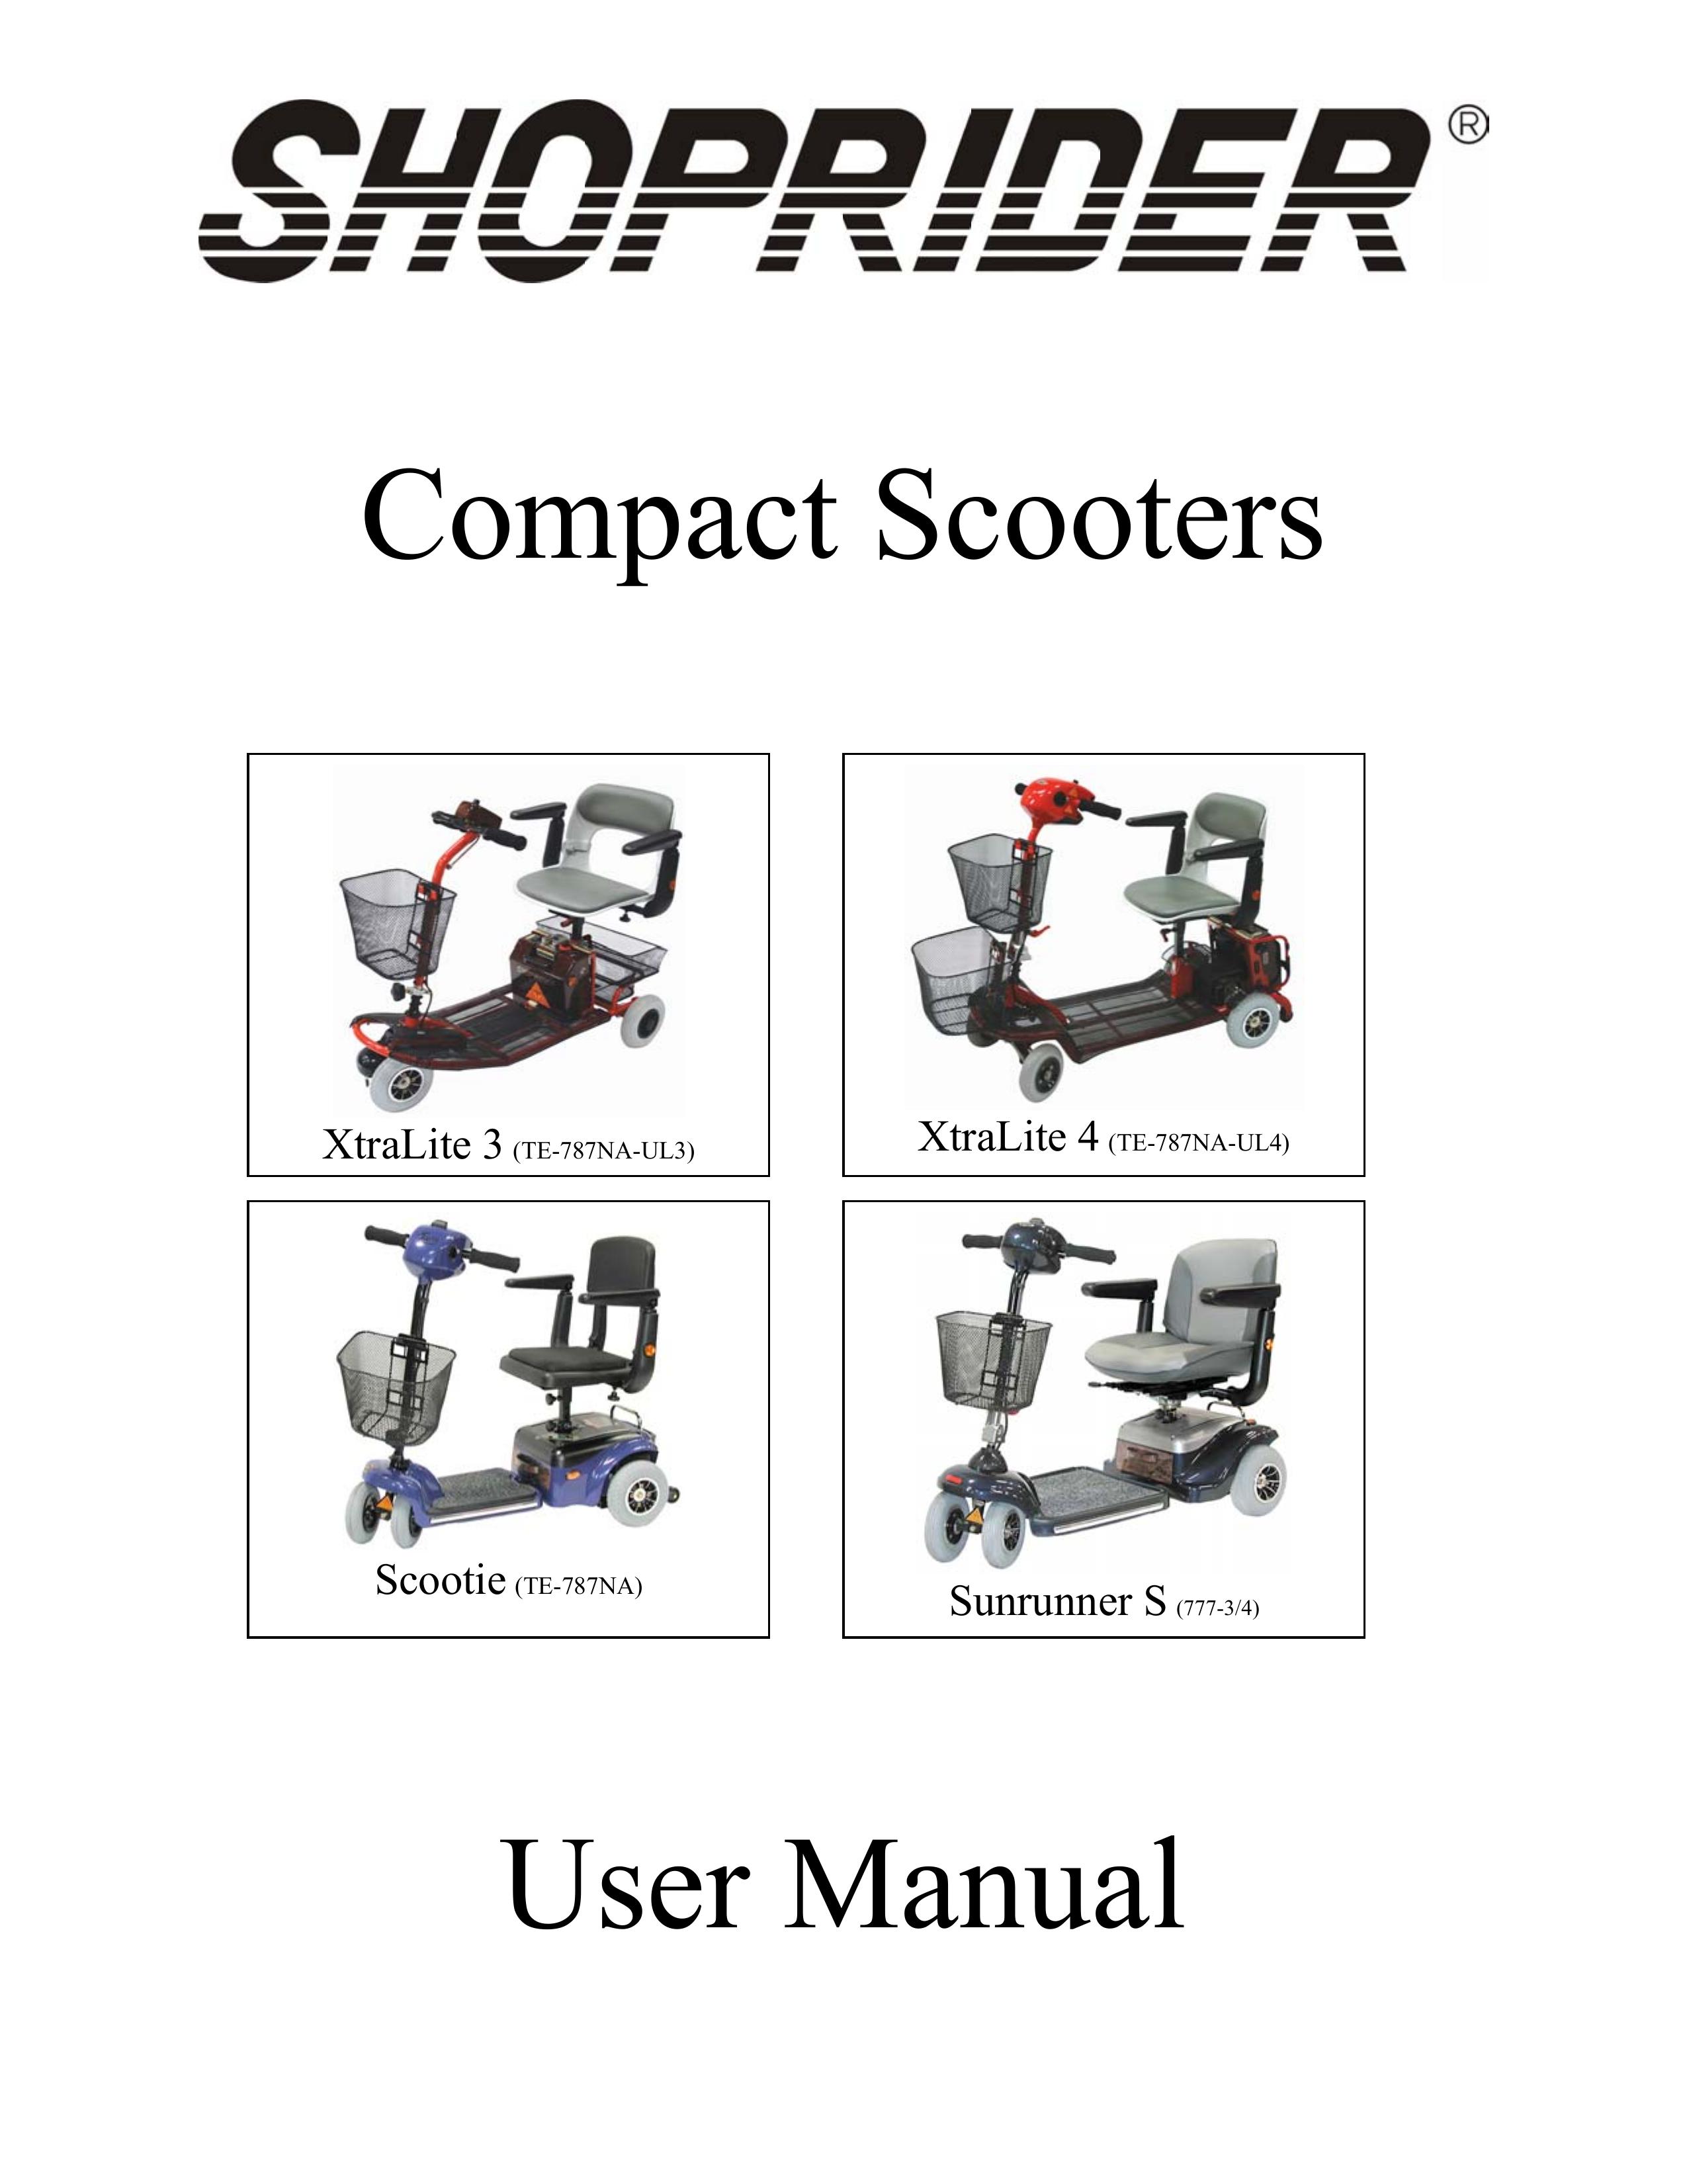 Shoprider Sunrunner S Mobility Aid User Manual